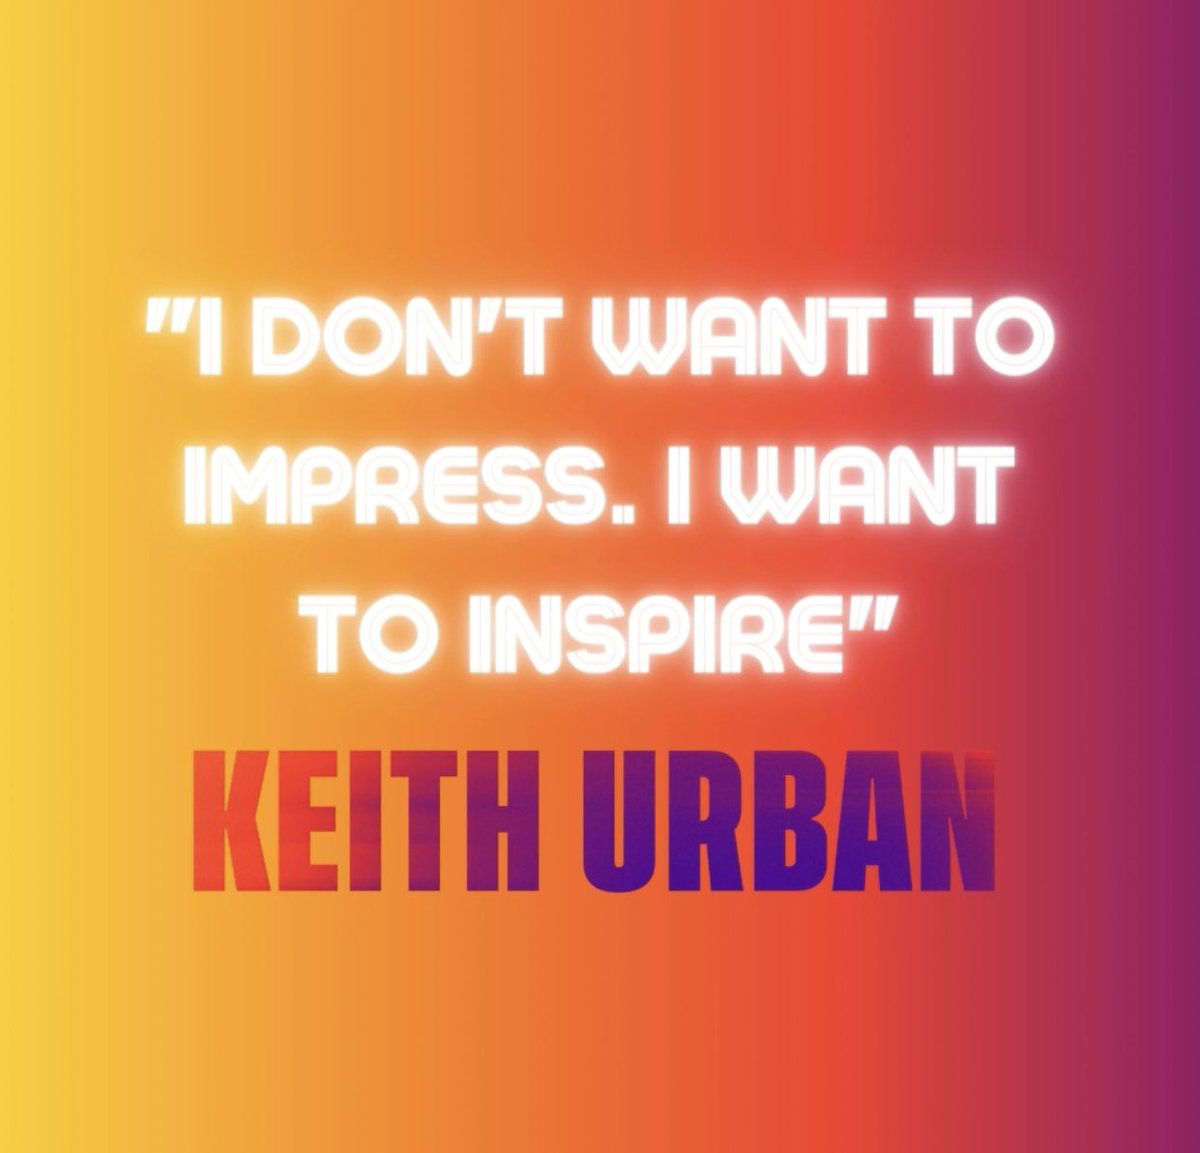 Keith Urban Central We Are Only 19 Days Away Until Keith S Birthday We Are So Excited To Be Celebrating This Month And We Re Happy You Are Celebrating With Us We